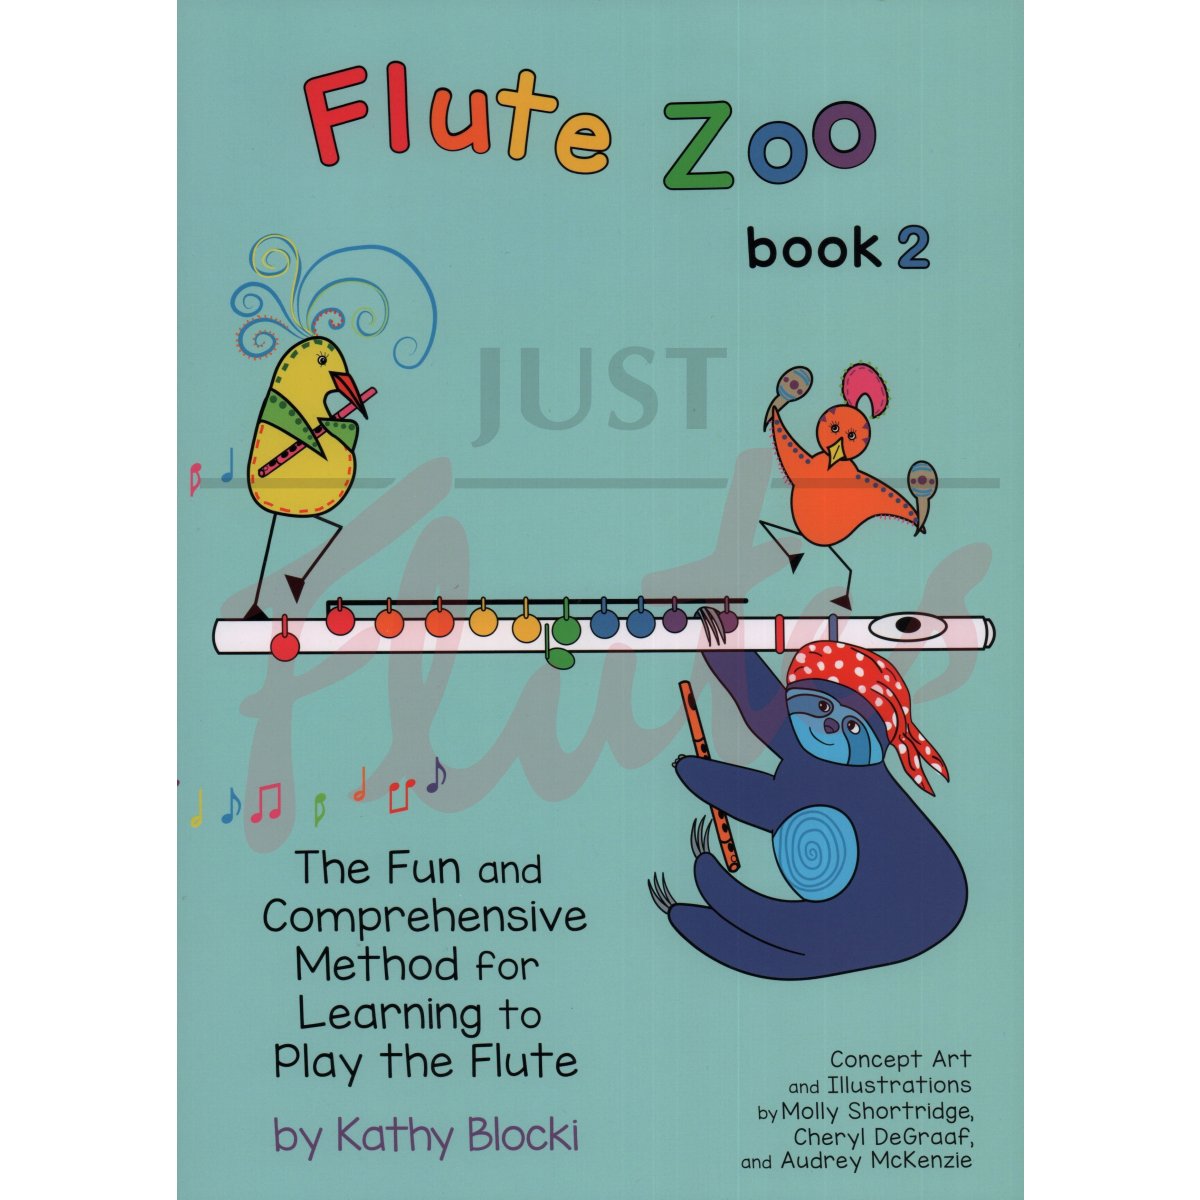 Flute Zoo Book 2